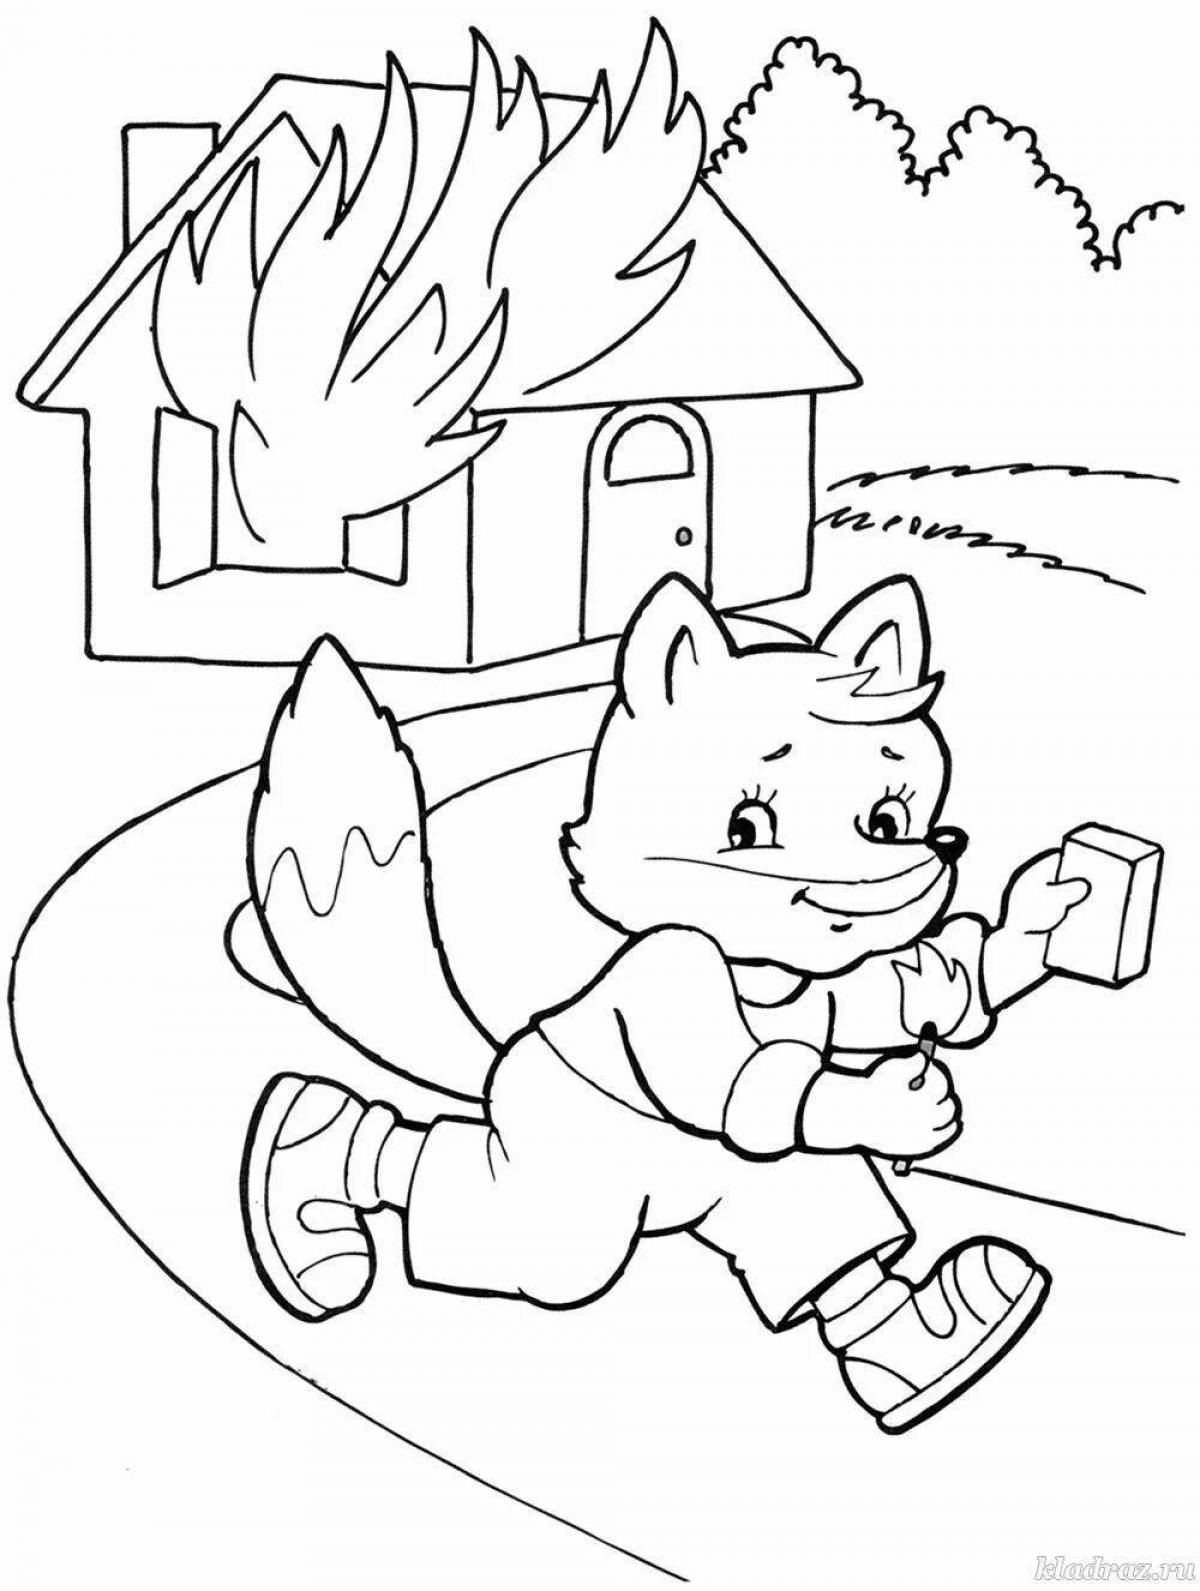 Color-fabulous coloring page от obzh